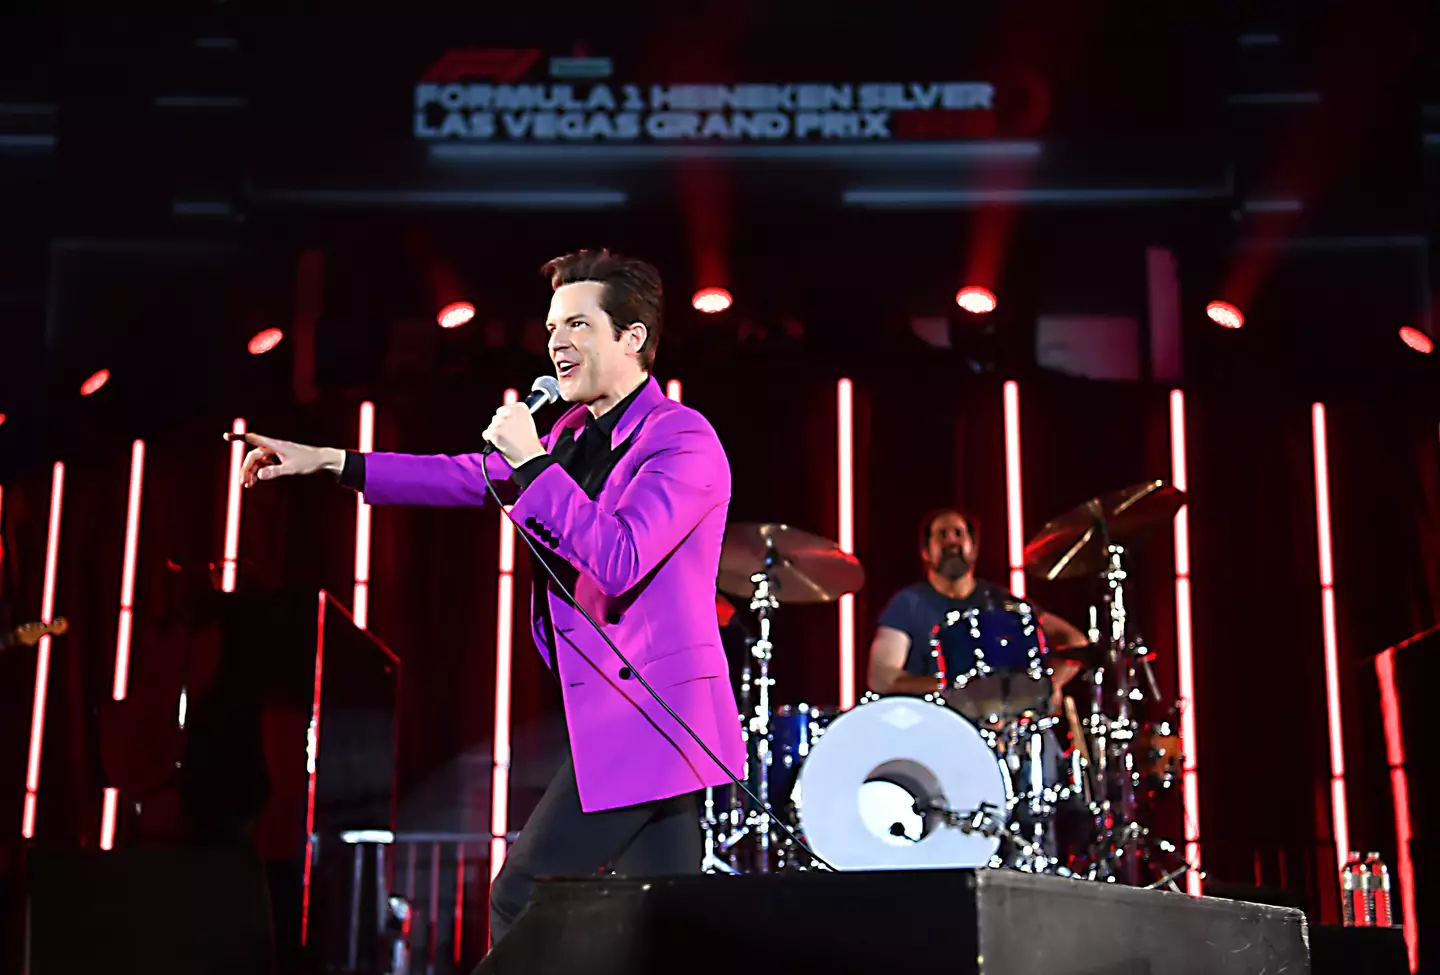 Brandon Flowers invited a guest onstage to play drums.